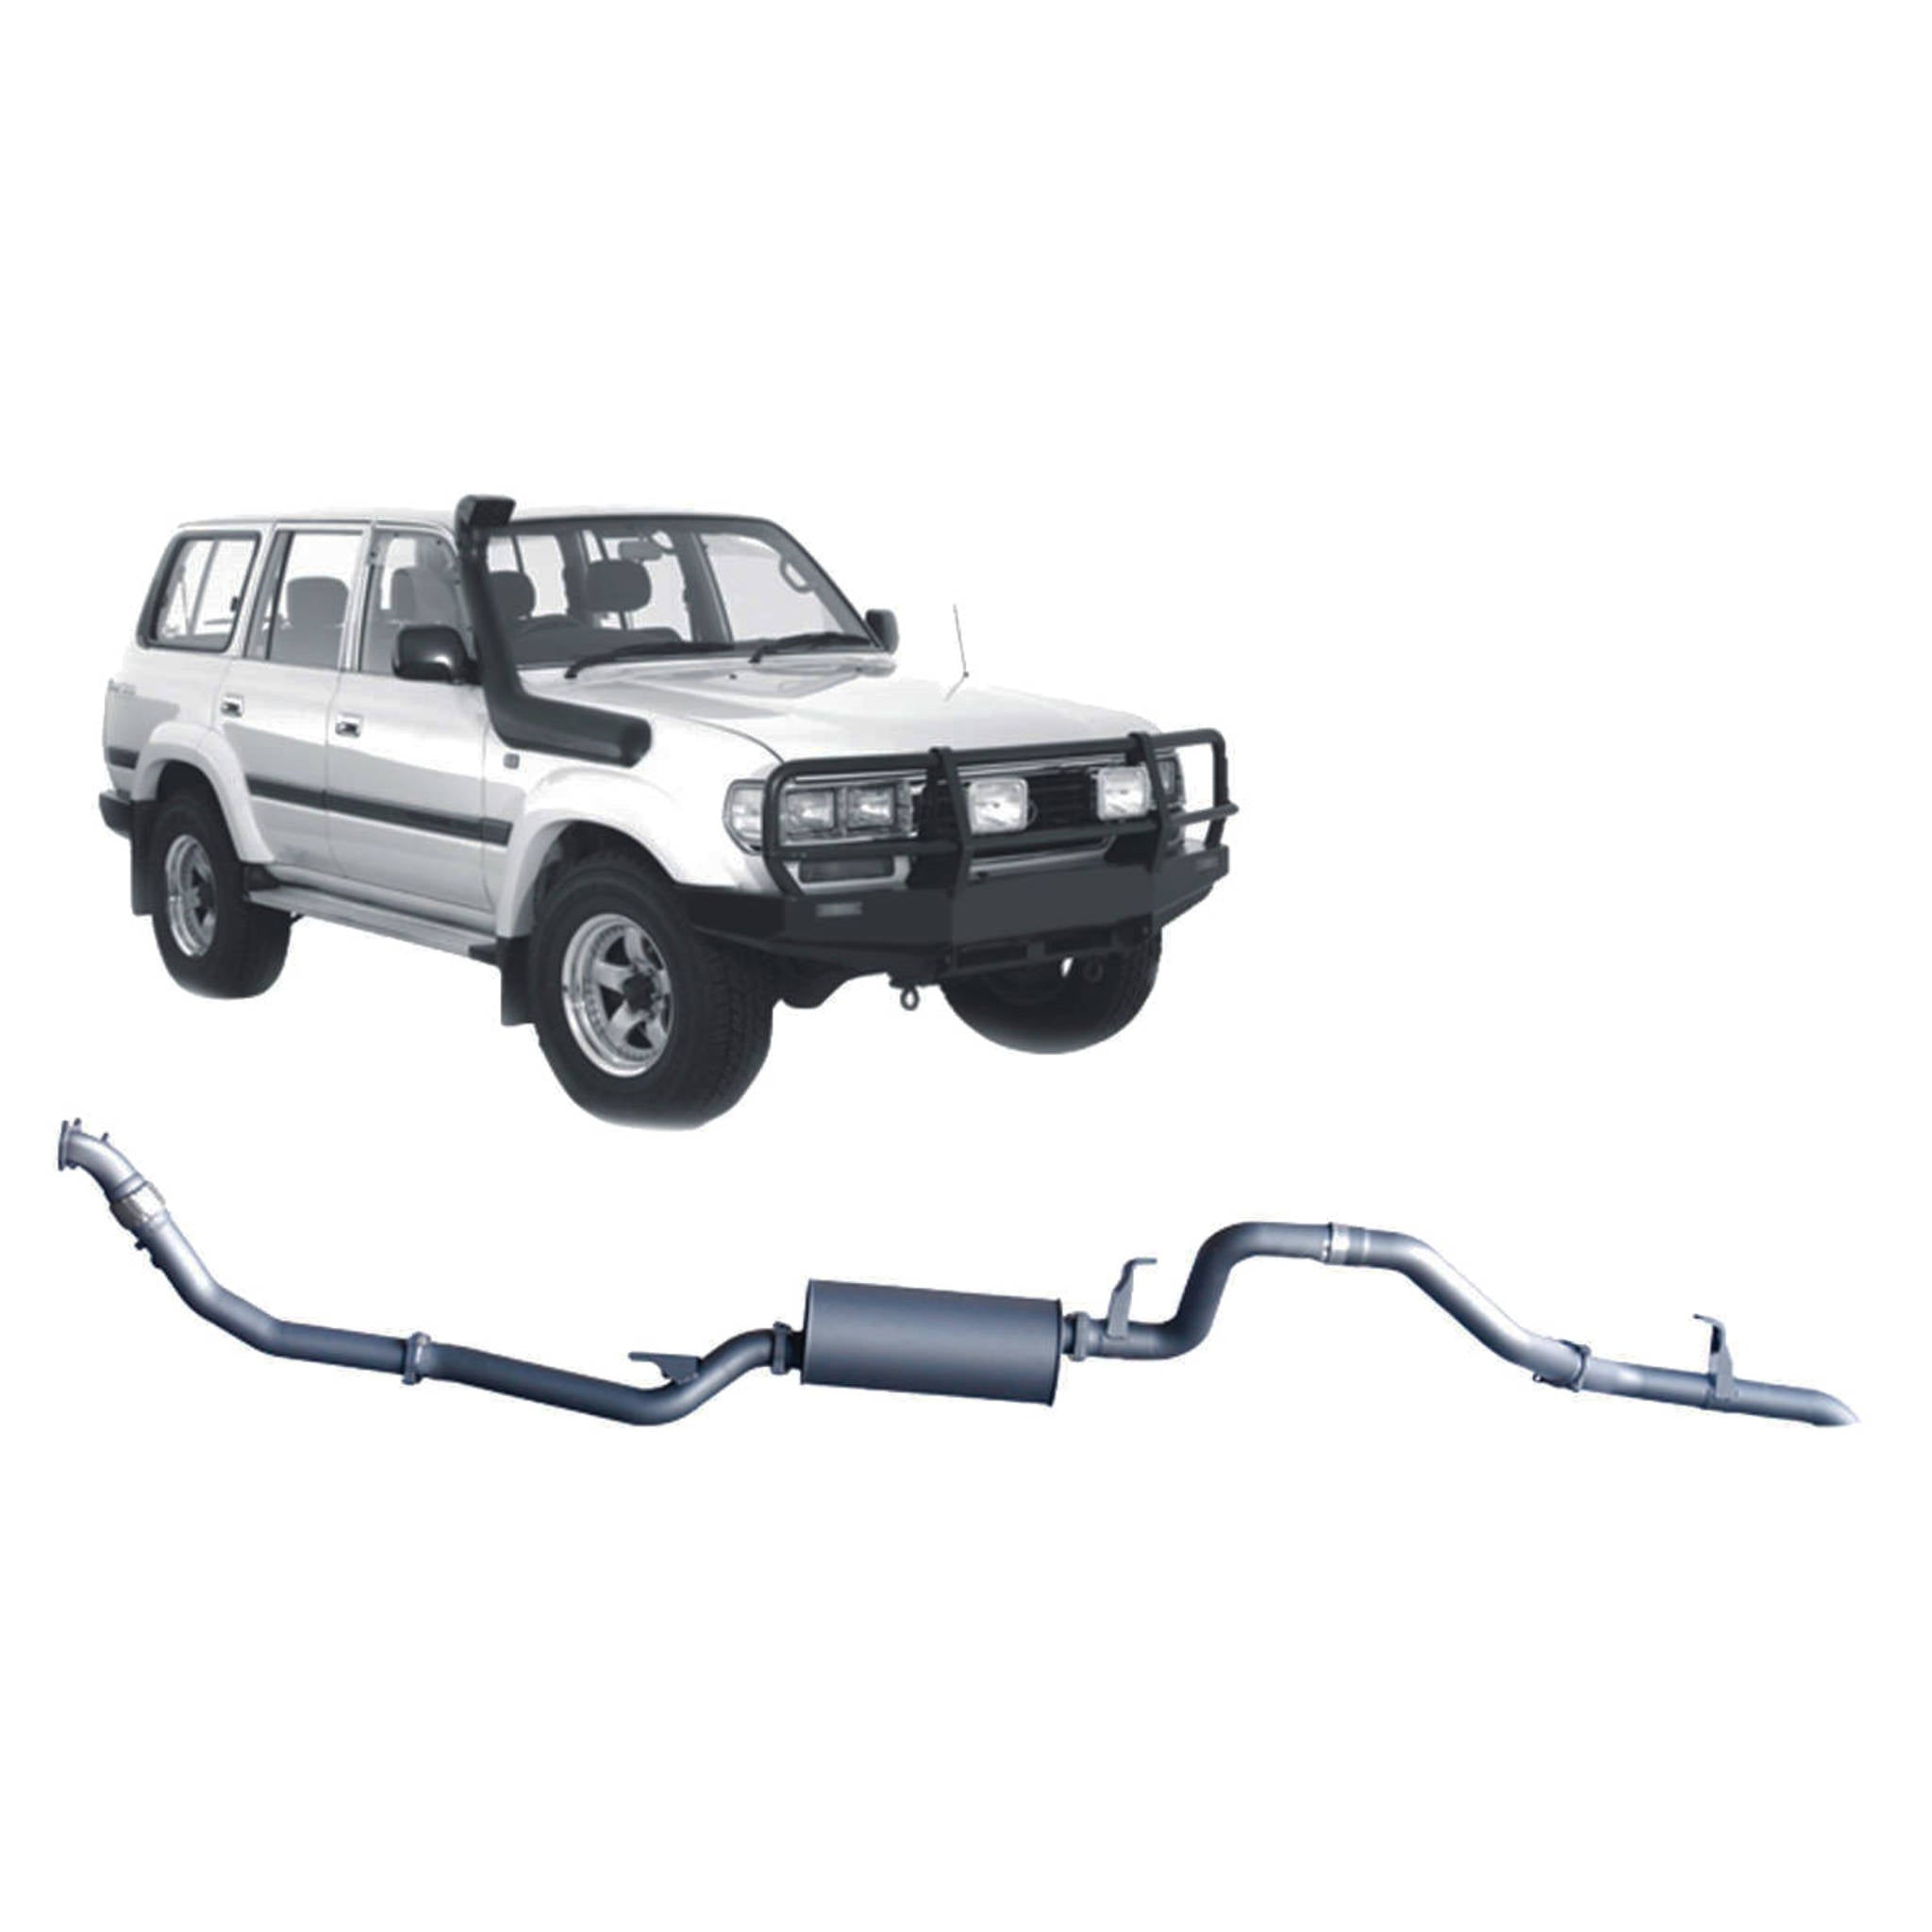 Redback 4x4 Extreme Duty Exhaust to suit Toyota Landcruiser 80 Series 4.2L 1HD-T/FT (01/1990 - 02/1998)